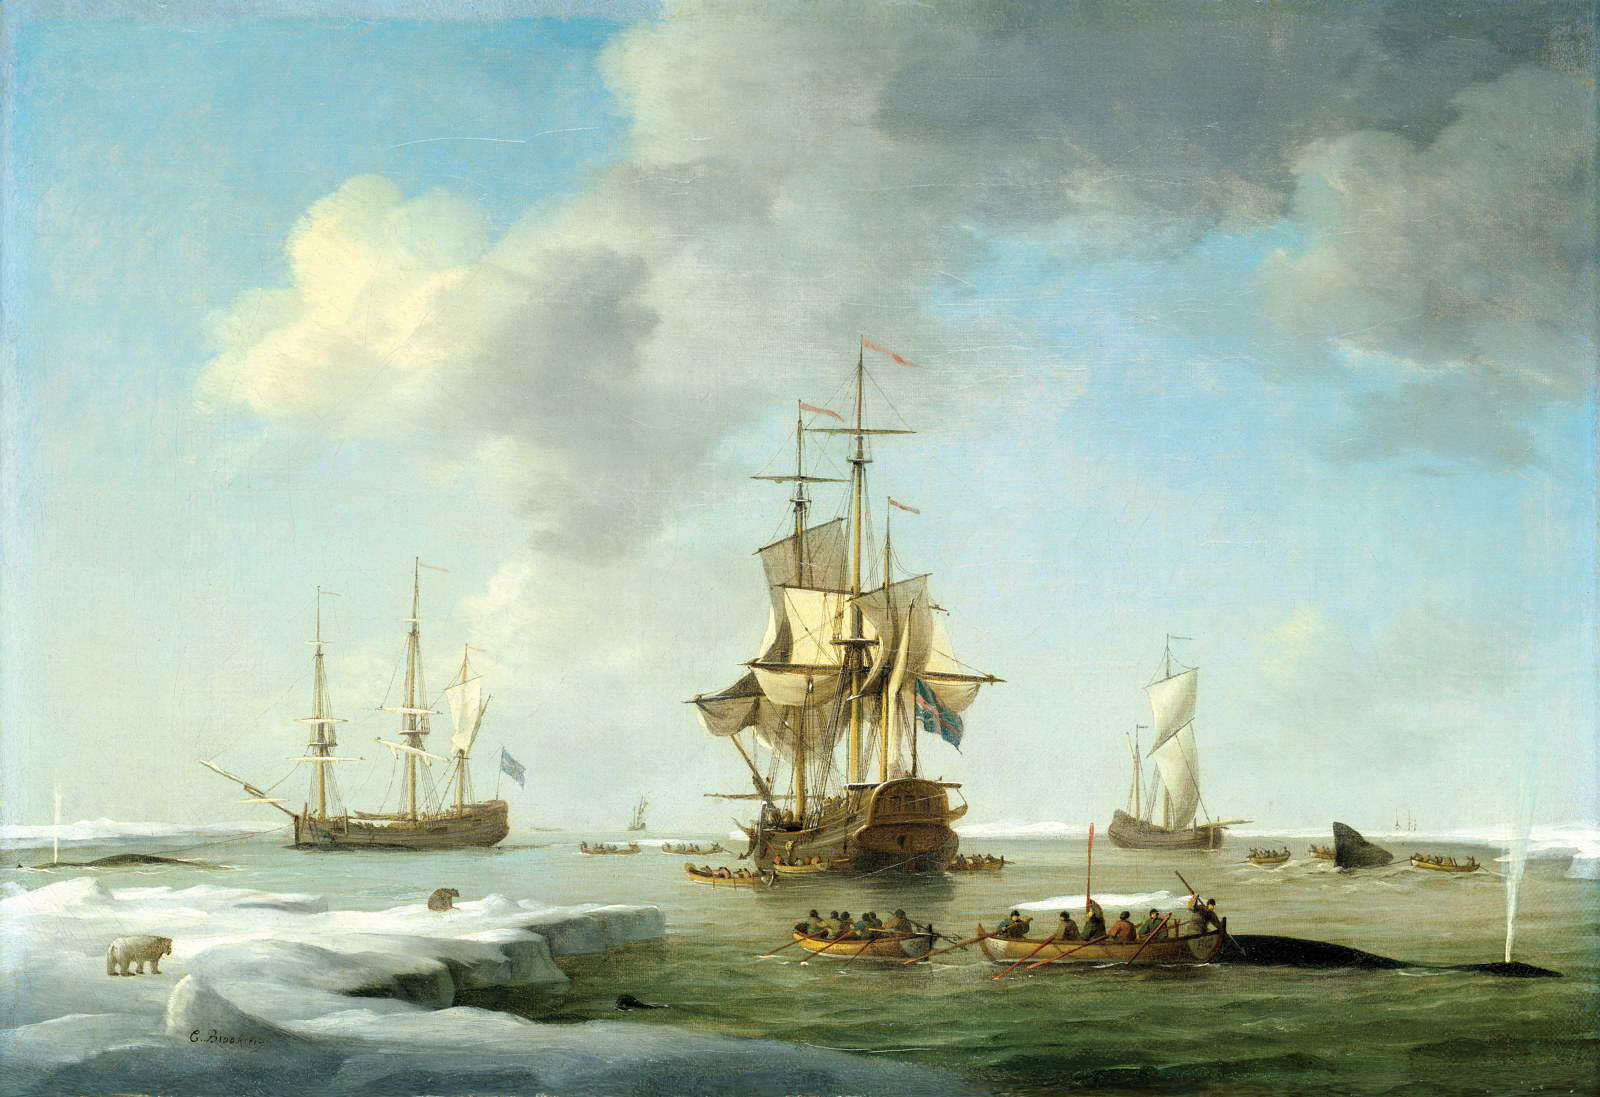 Painting by Charles Brooking, 'Greenland fishery' 1750